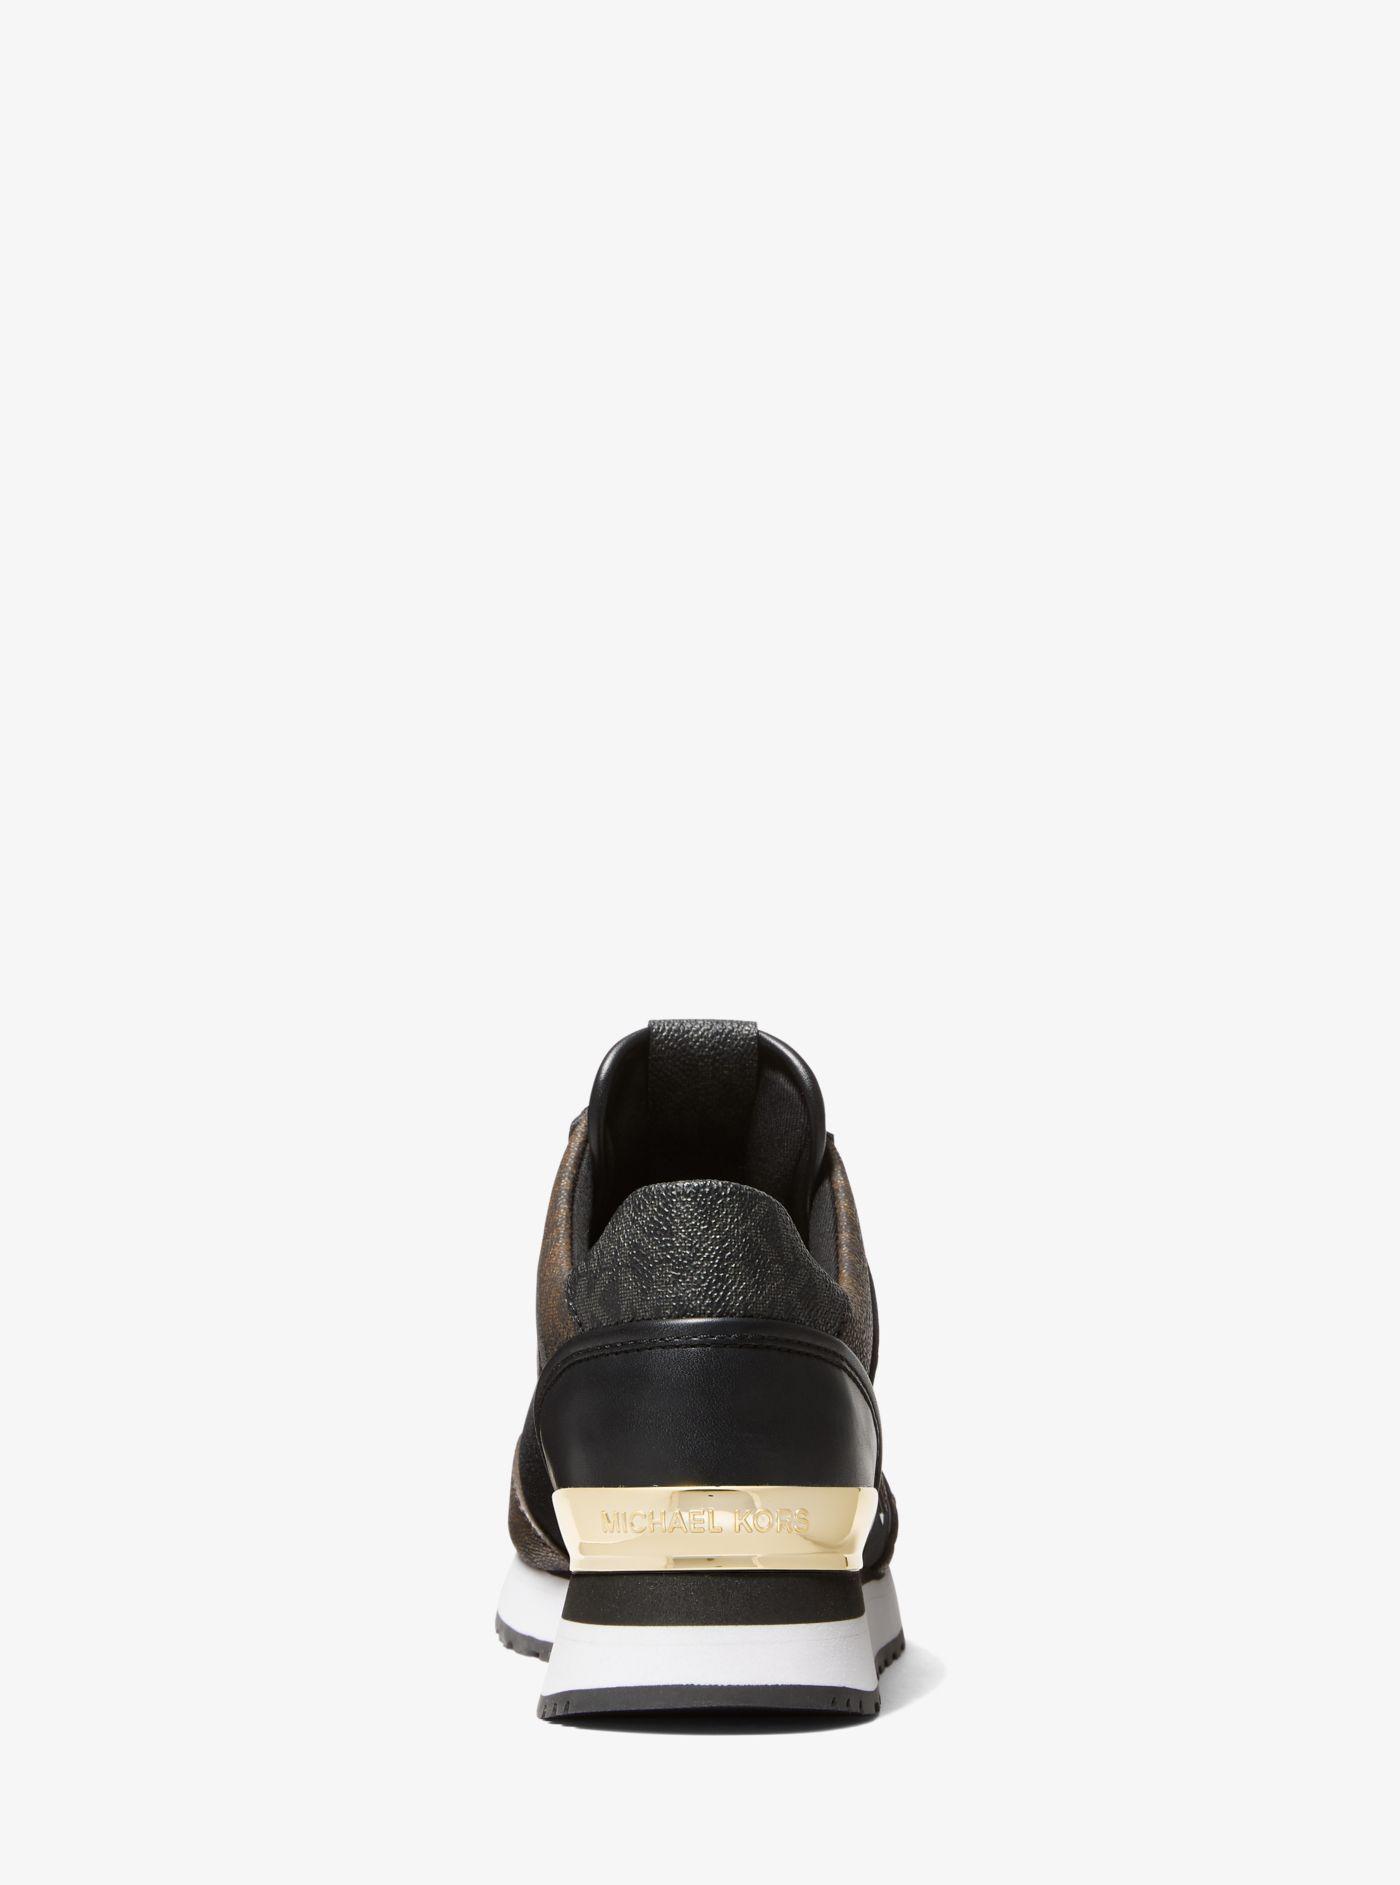 Michael Kors Maddy Logo Trainer in Black | Lyst